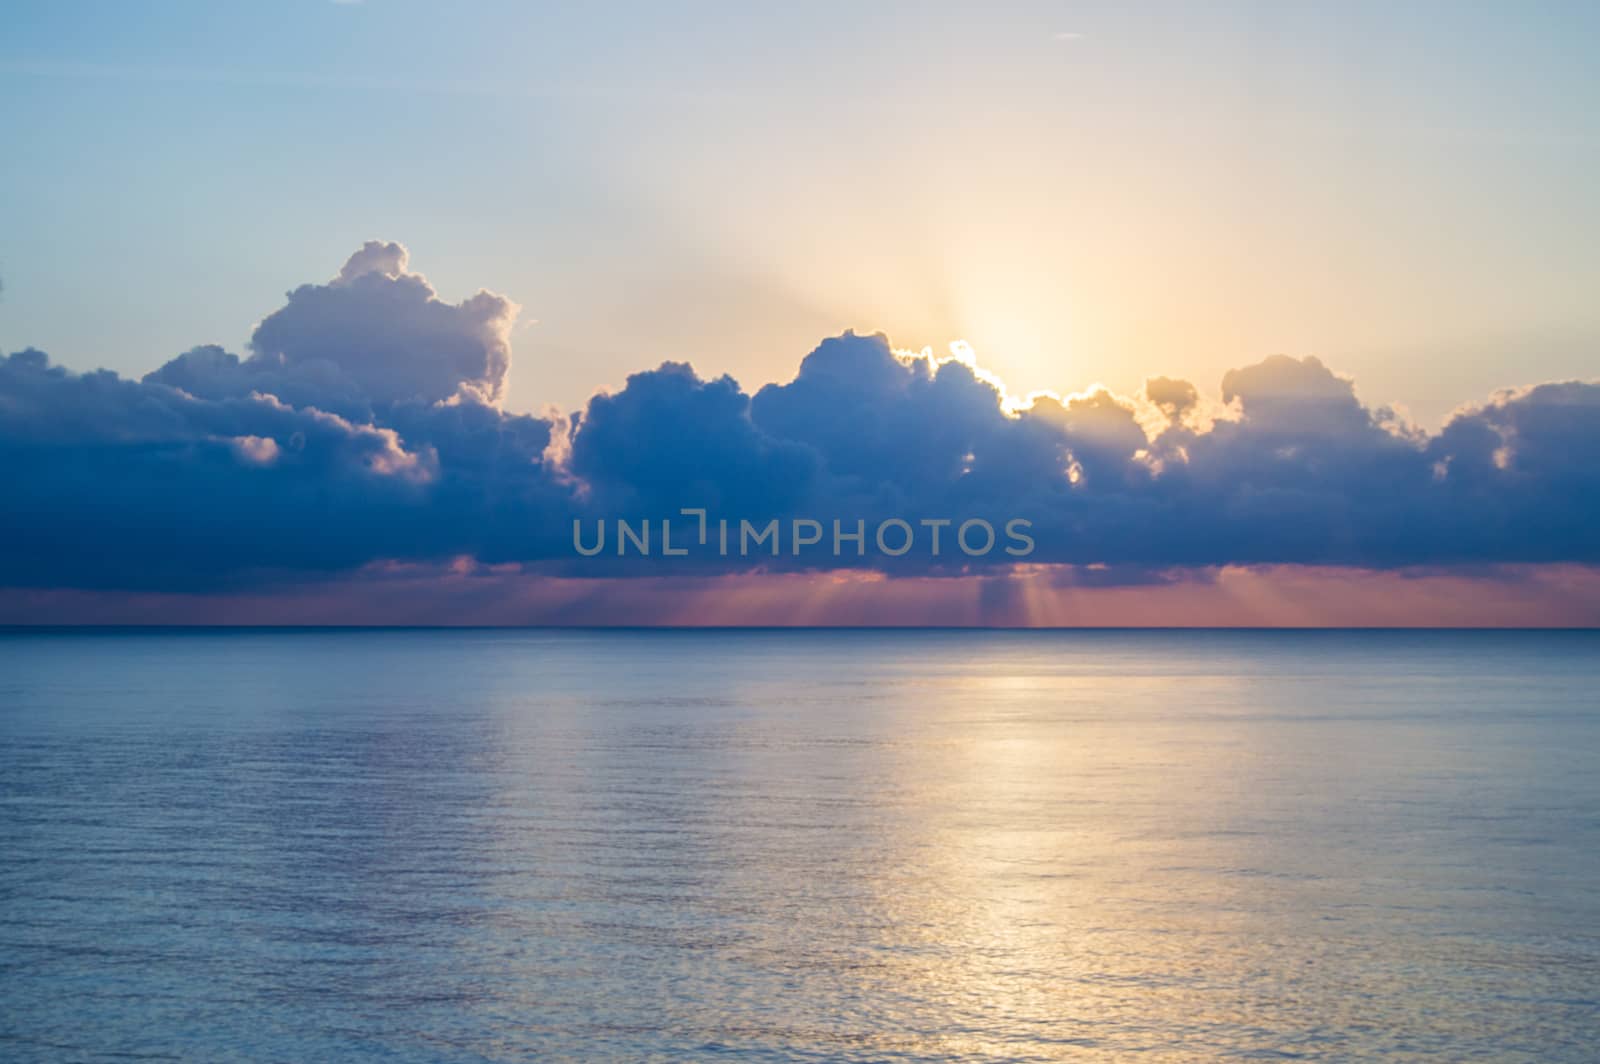 Beautiful sunset and silver path on the sea, blue clouds in the sky, background by claire_lucia